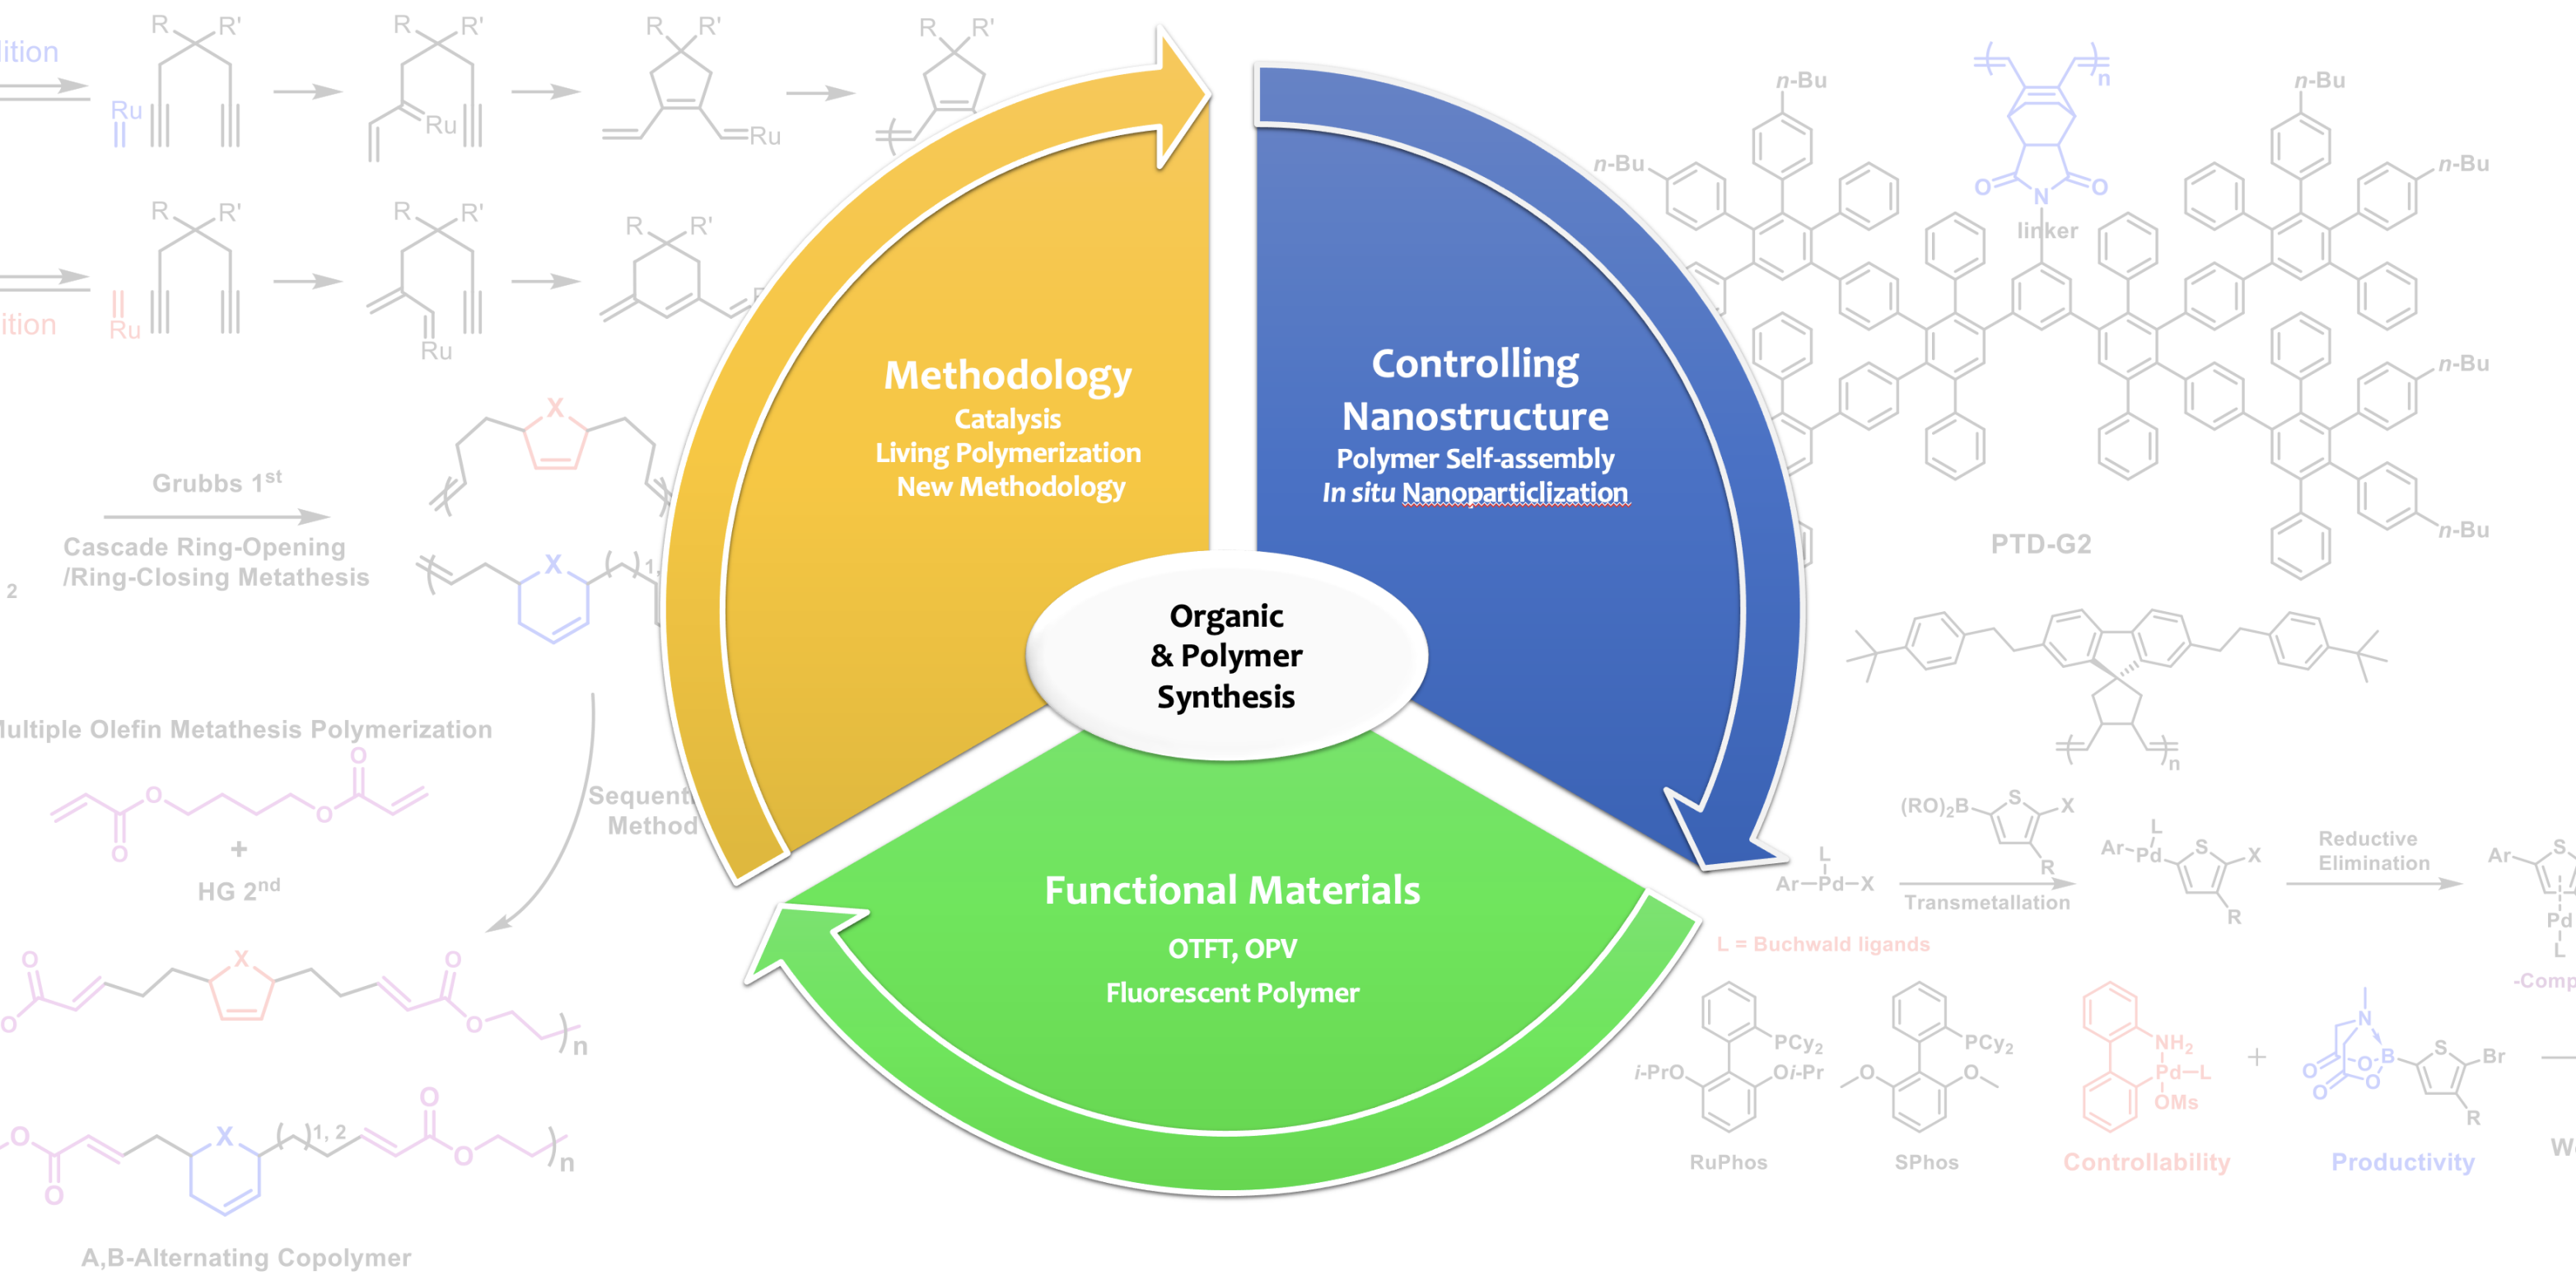 Image describing the three main parts of Organic and Polymer Synthesis